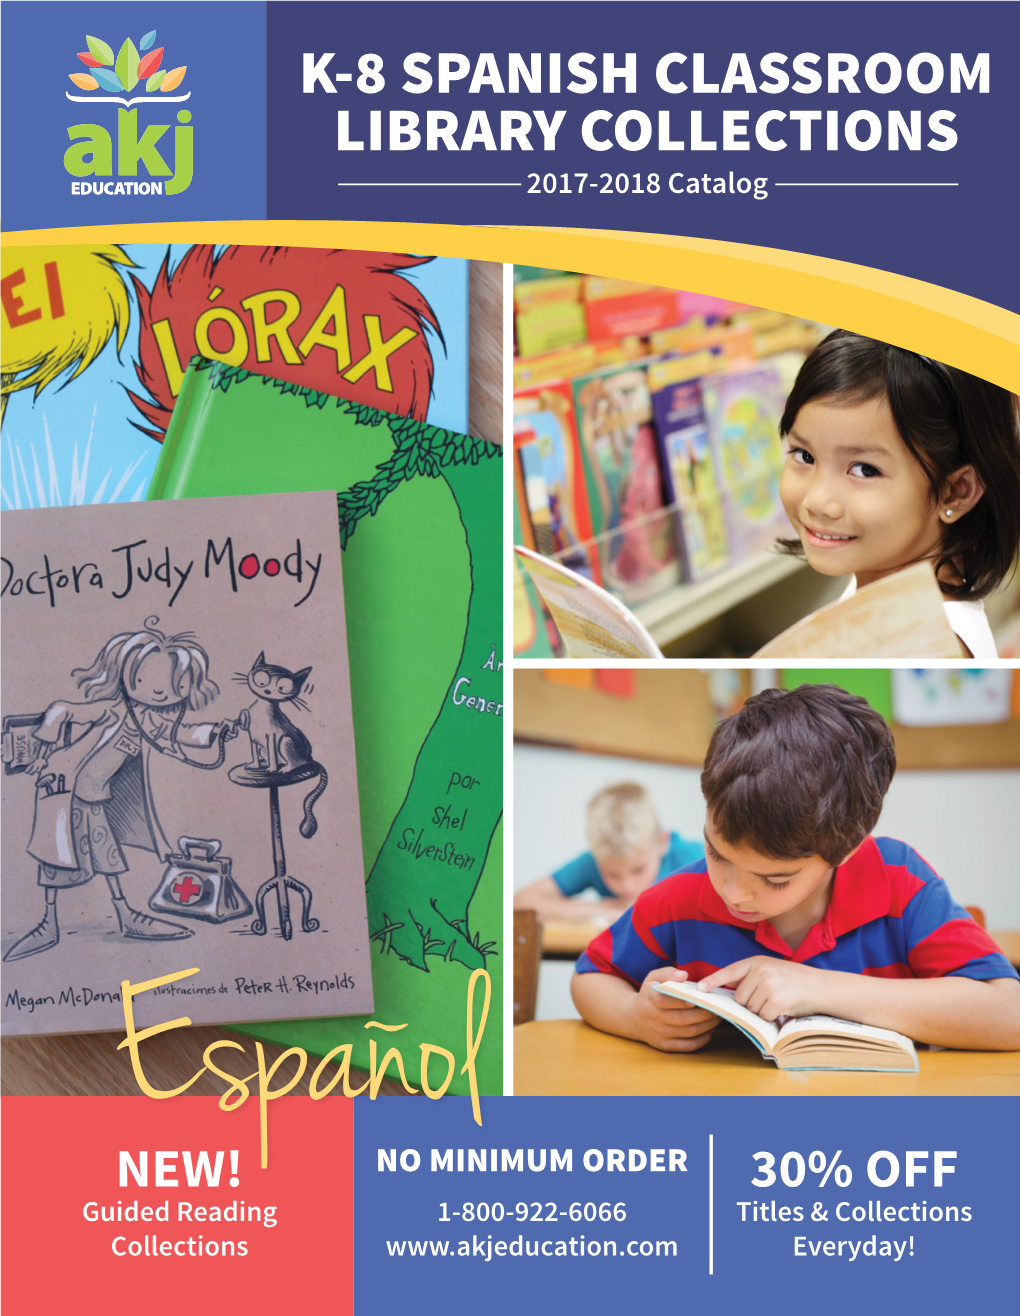 K-8 SPANISH CLASSROOM LIBRARY COLLECTIONS 2017-2018 Catalog